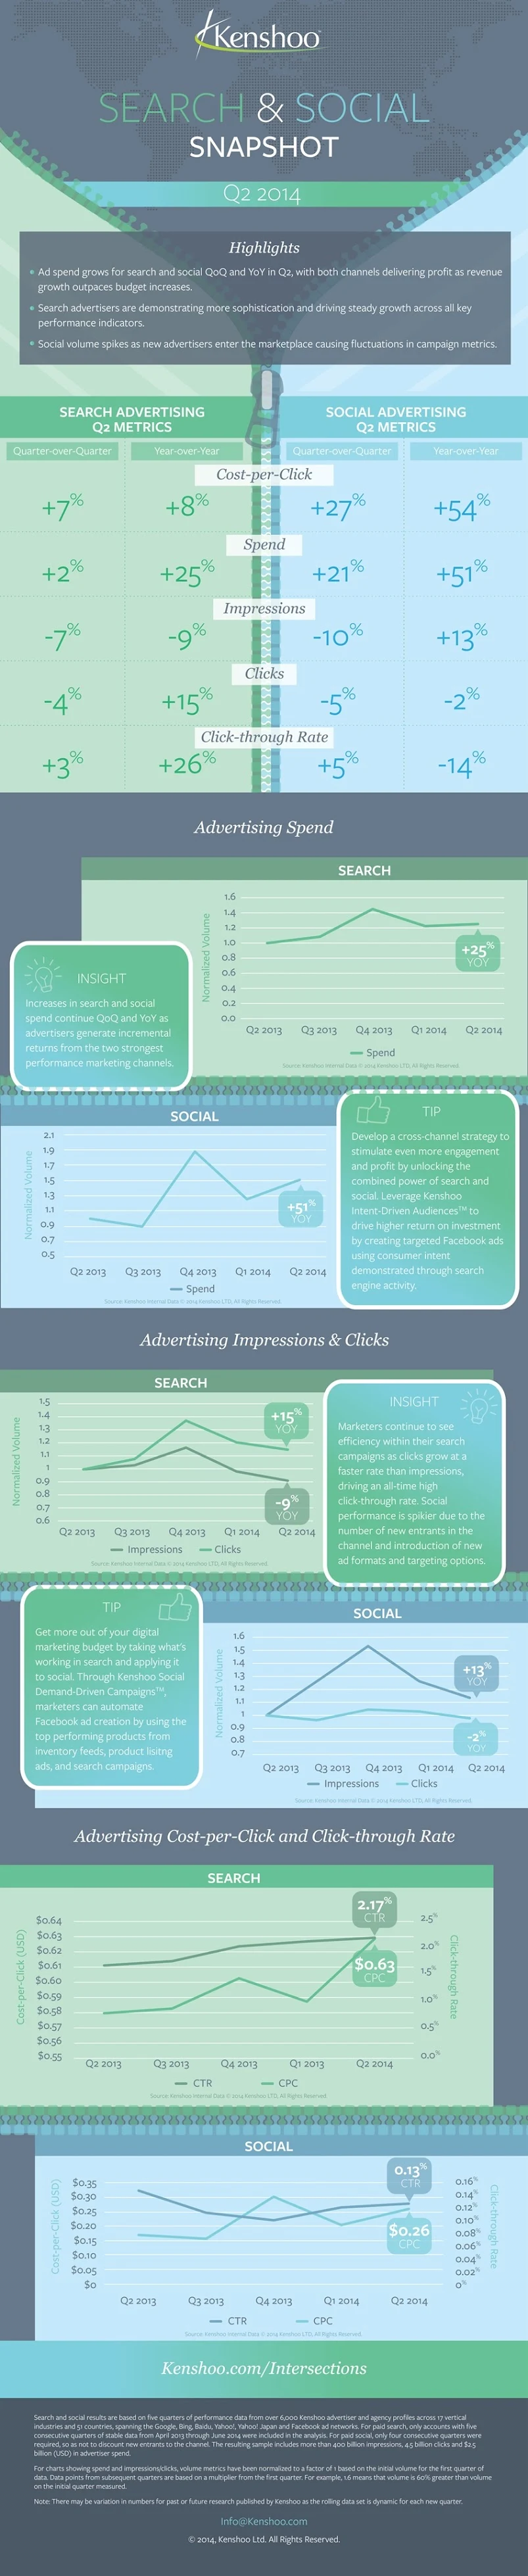 Search and Social Media Advertising Trends: Q2 2014 - #infographic